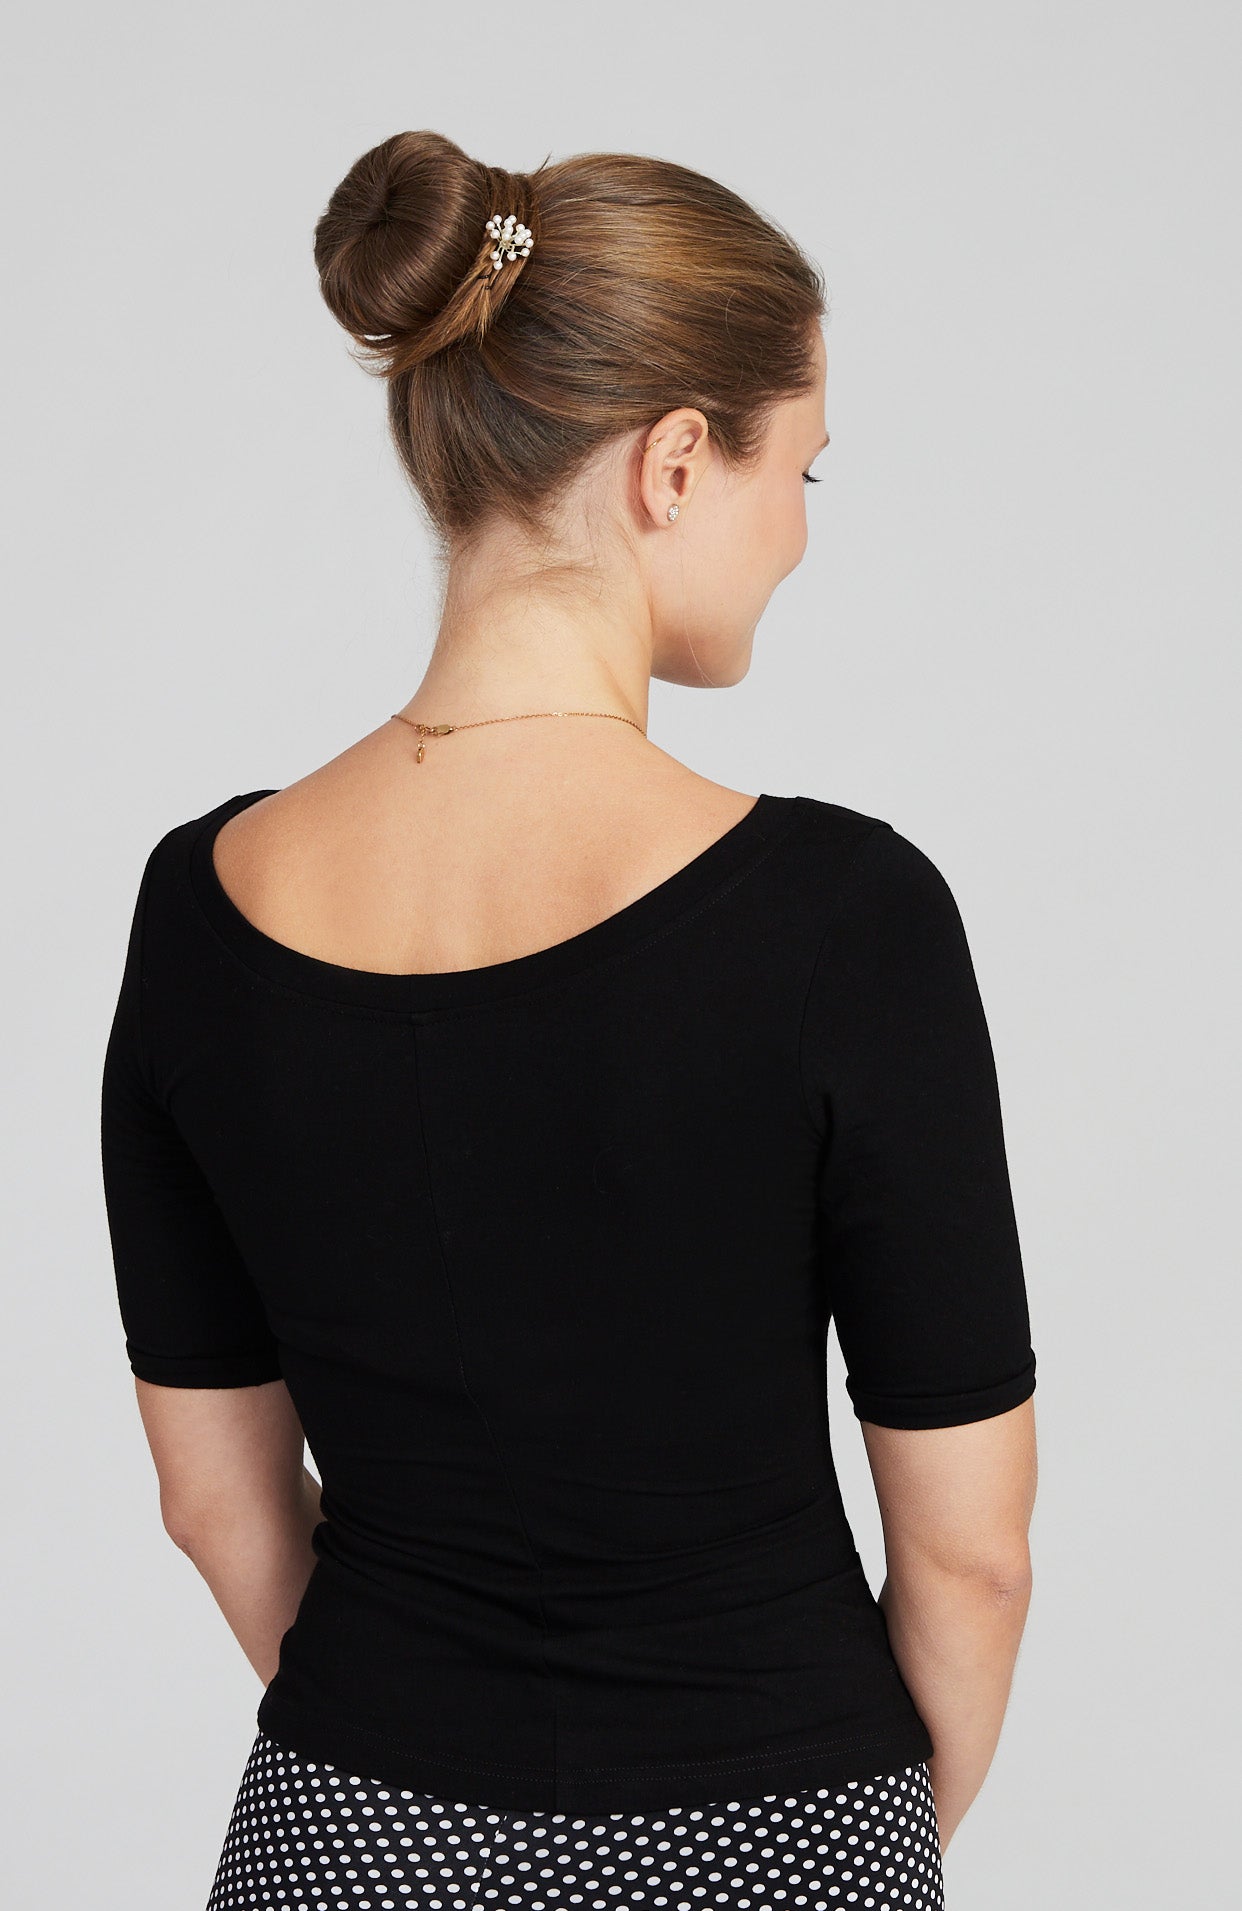 bamboo top with sleeves by Coleccion Berlin 